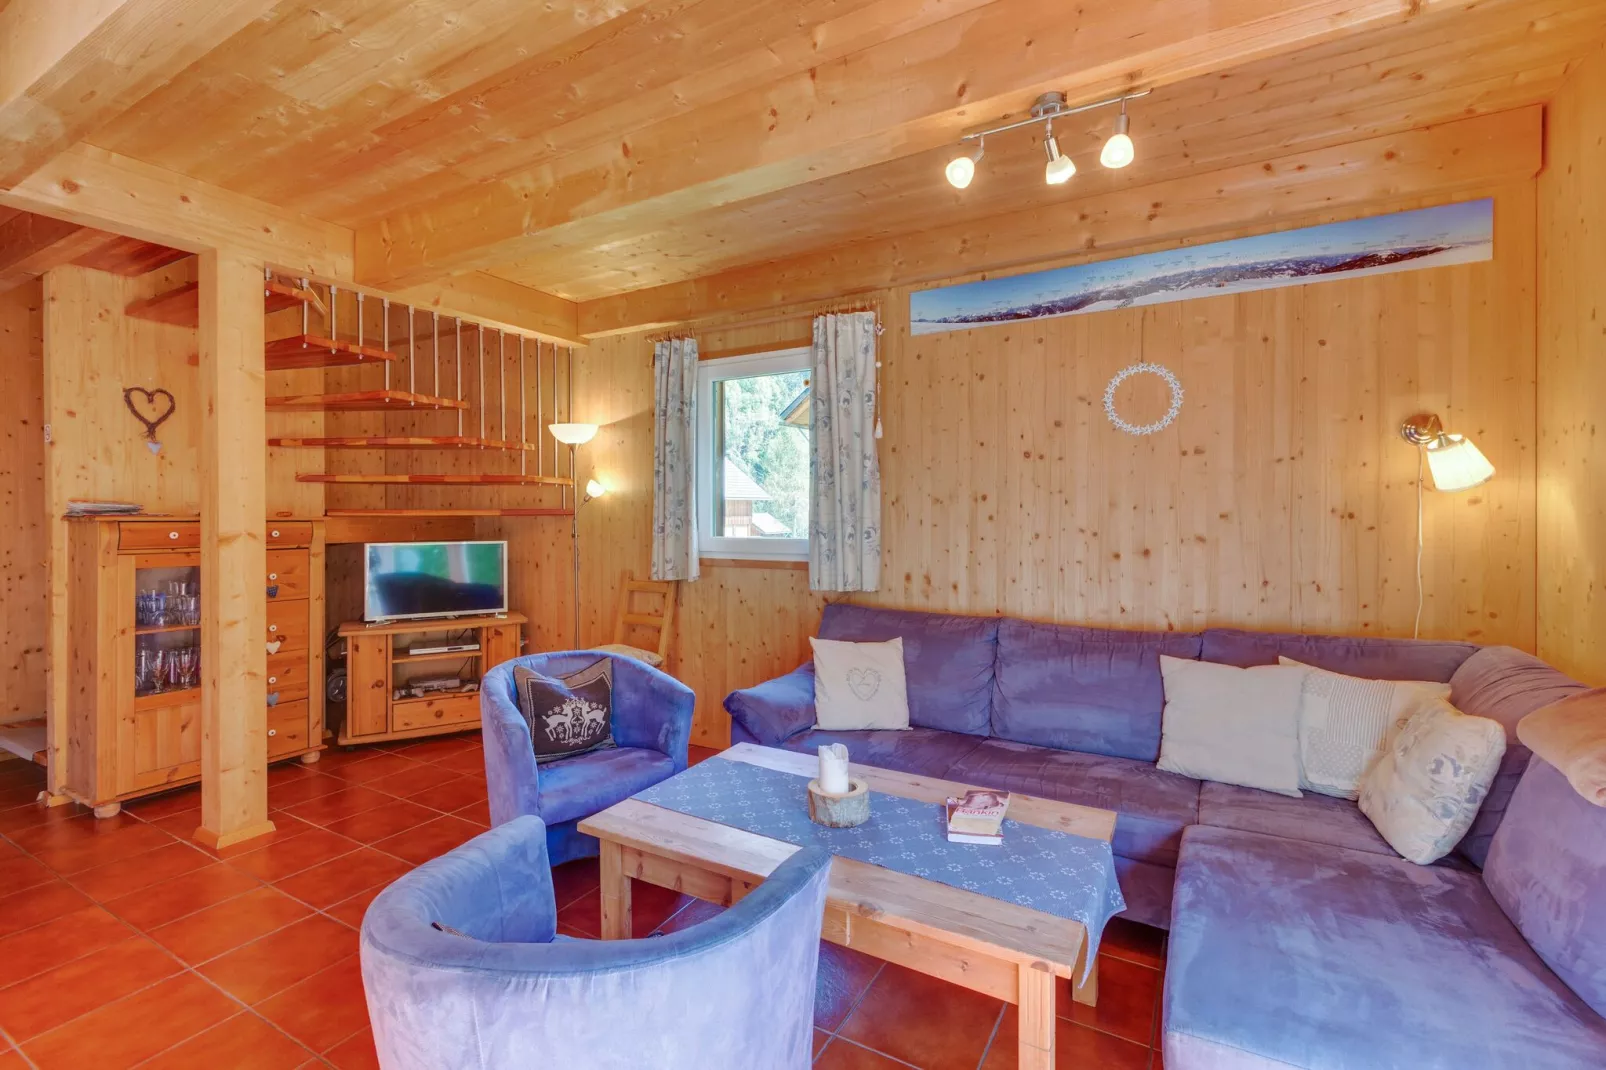 Chalet4You-Woonkamer